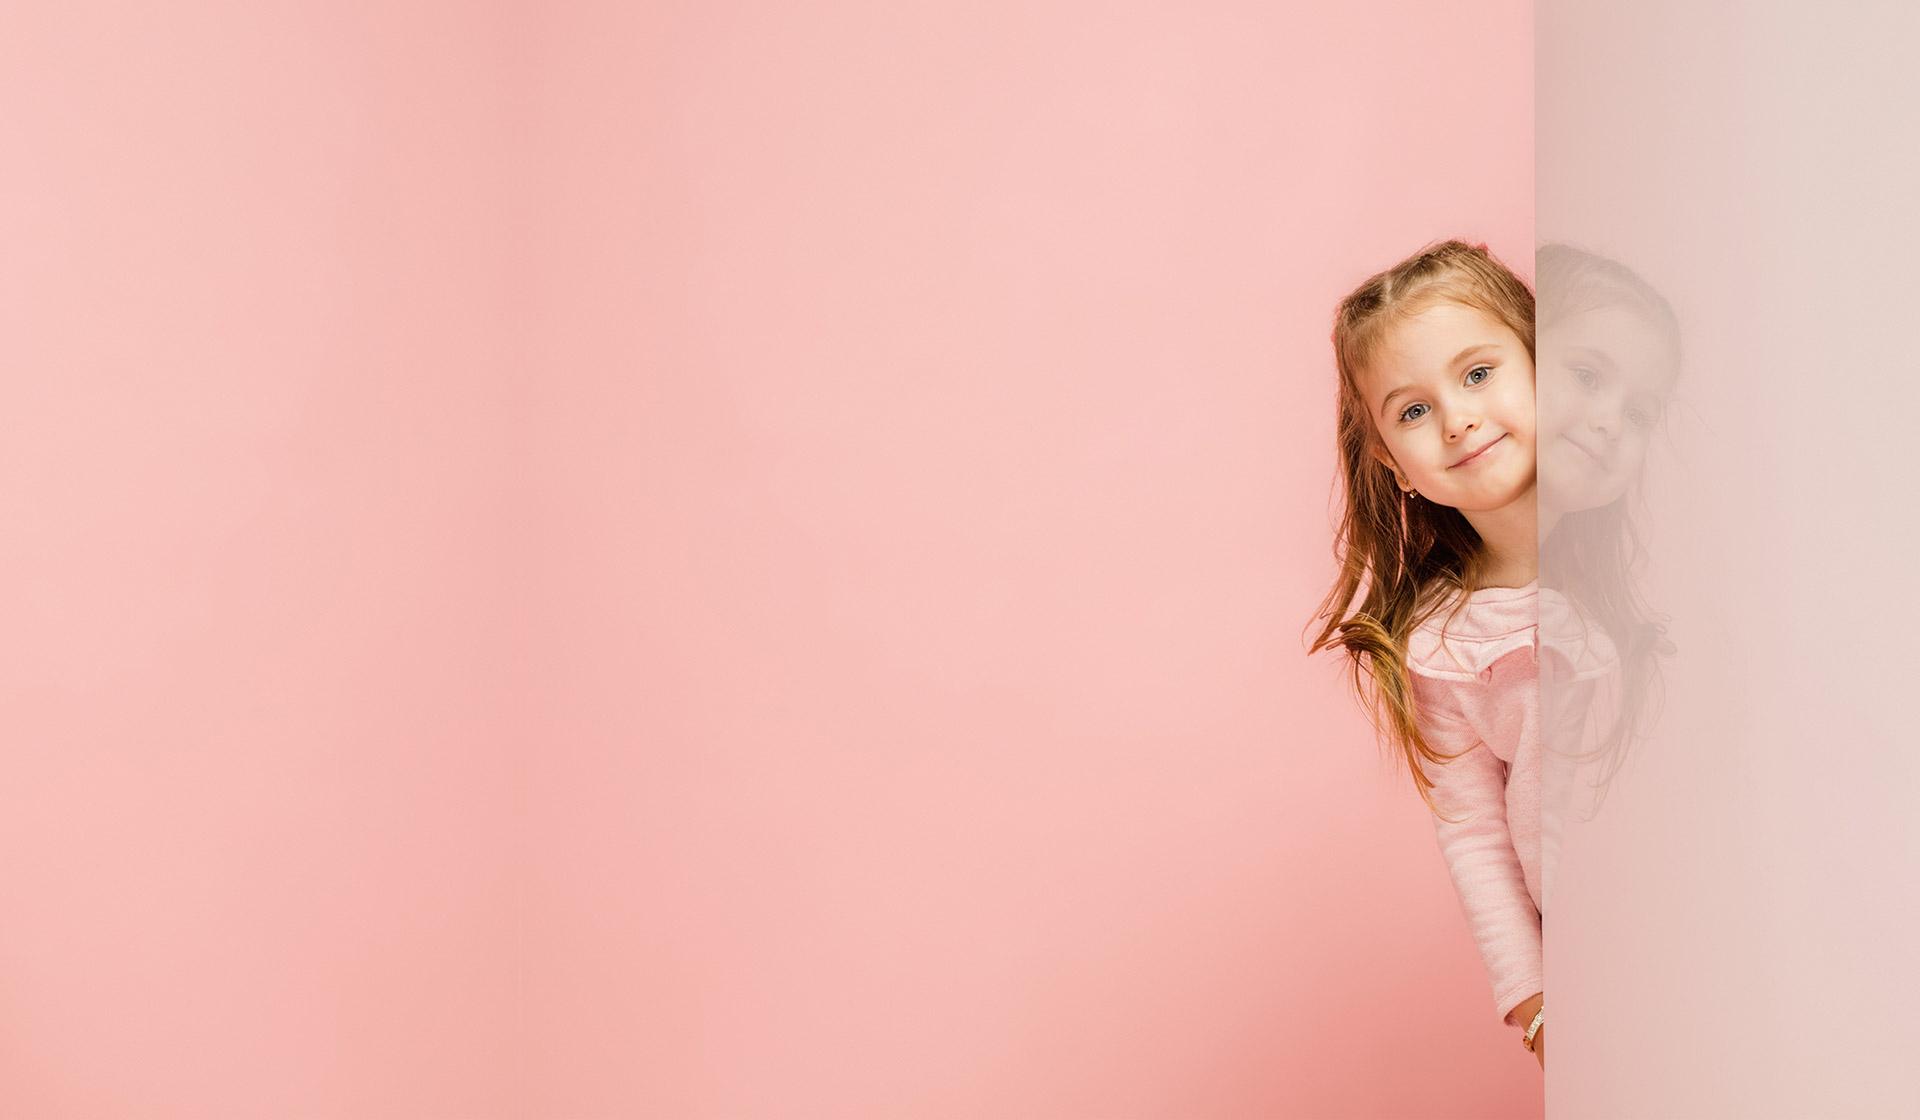 Young girl peeking from behind pink wall with pink background